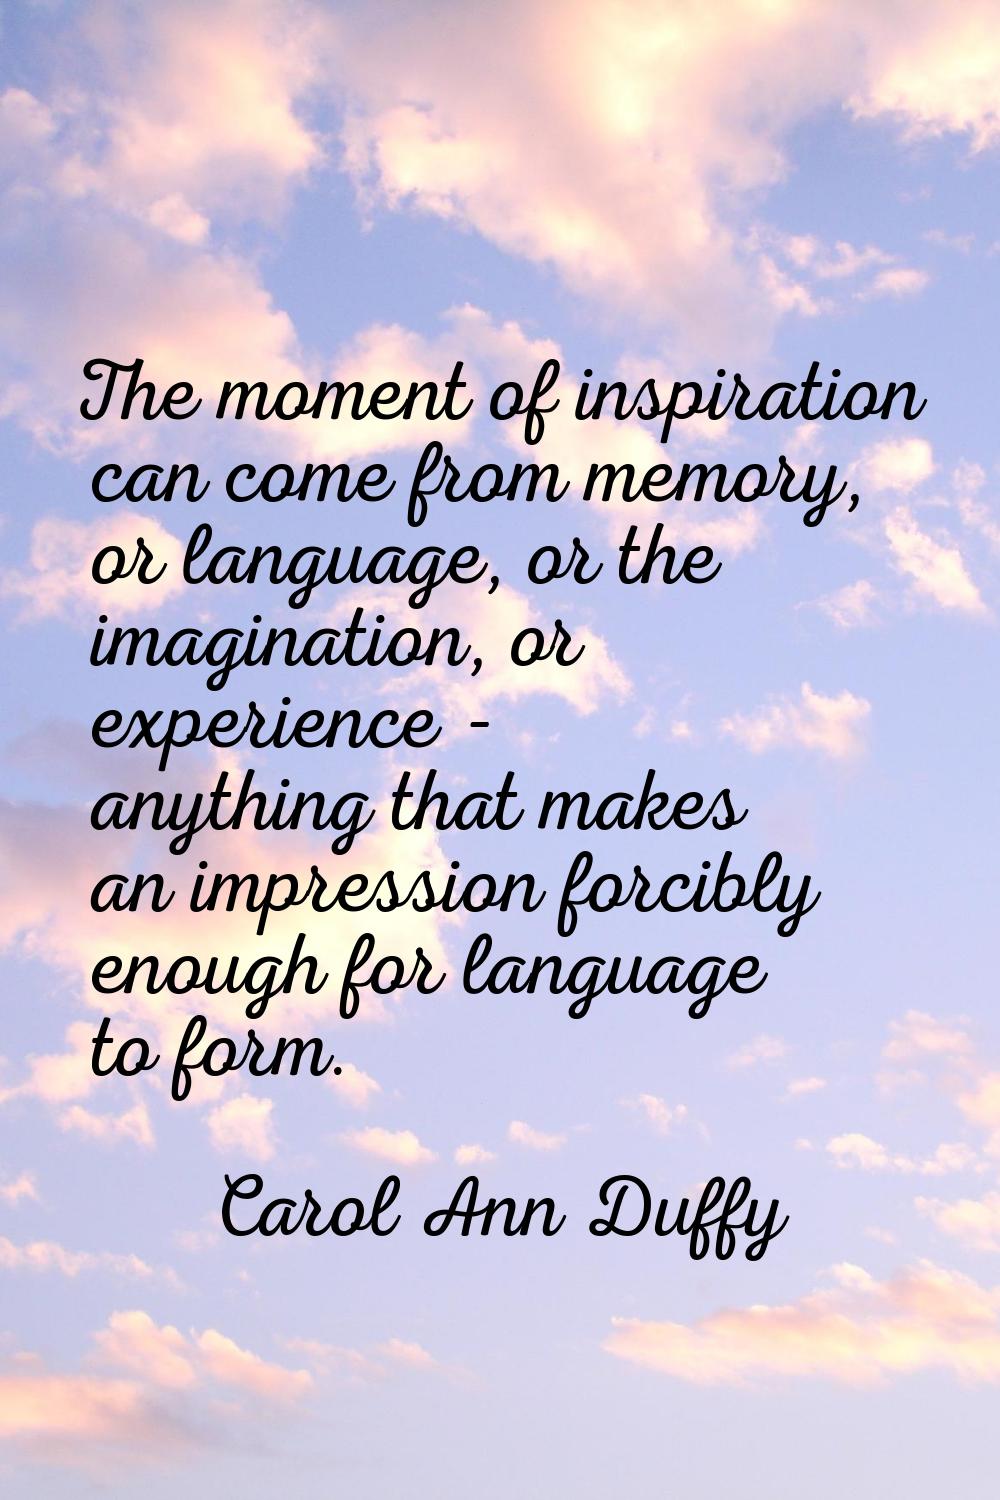 The moment of inspiration can come from memory, or language, or the imagination, or experience - an